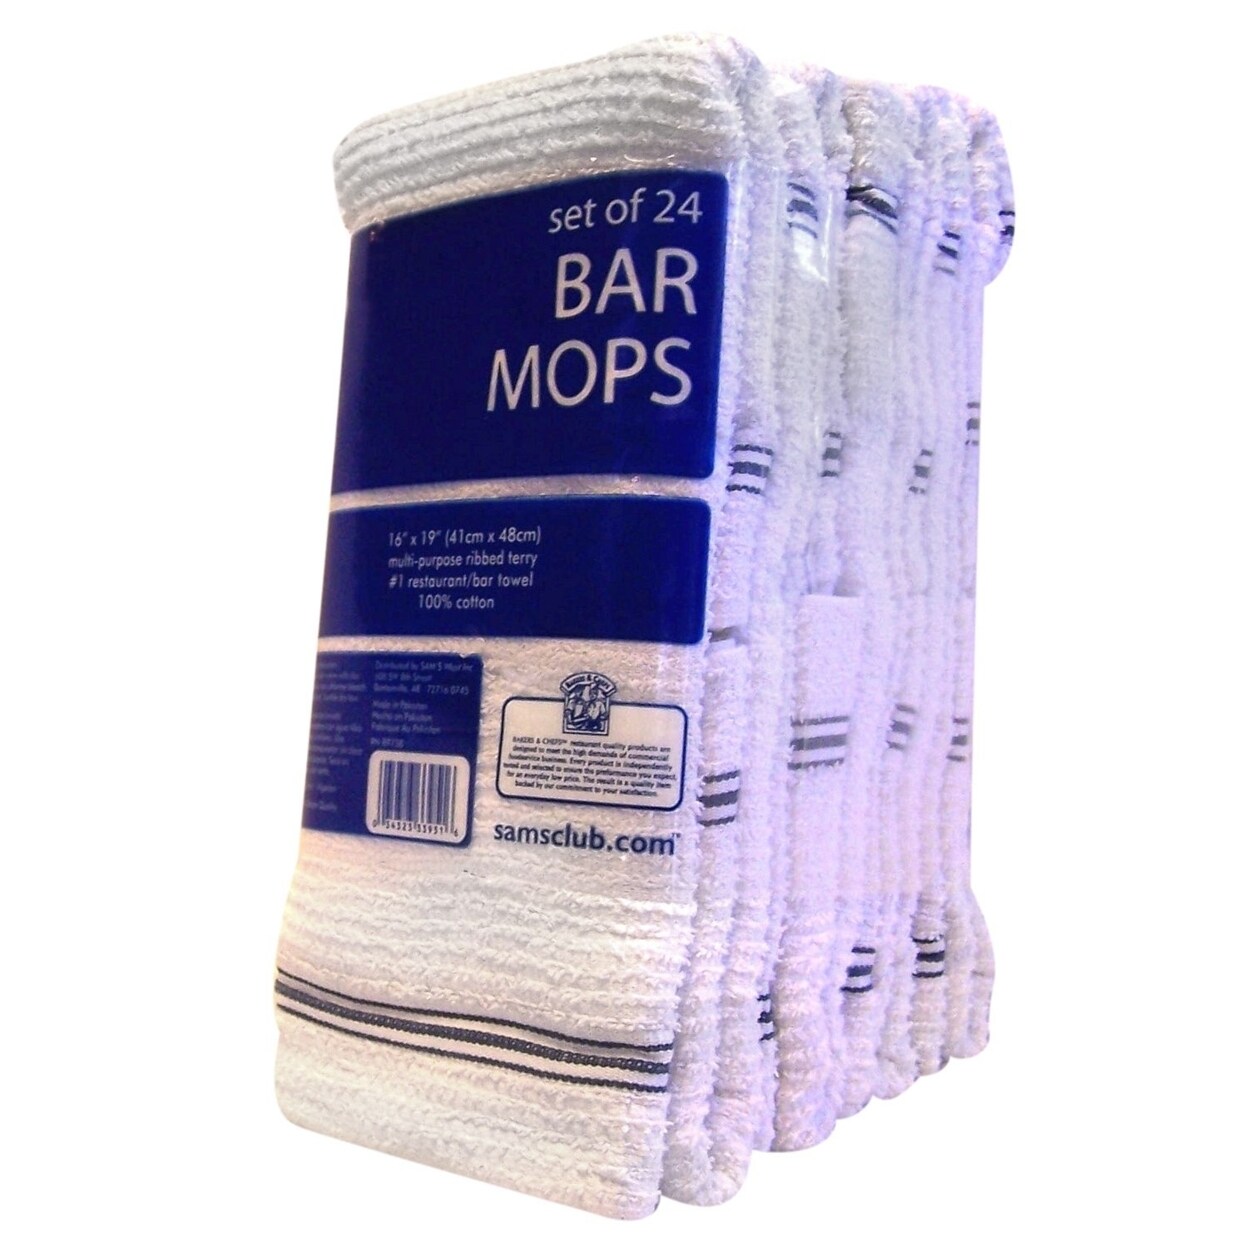 Why Restaurants Need Both Bar Mops and Kitchen Towels